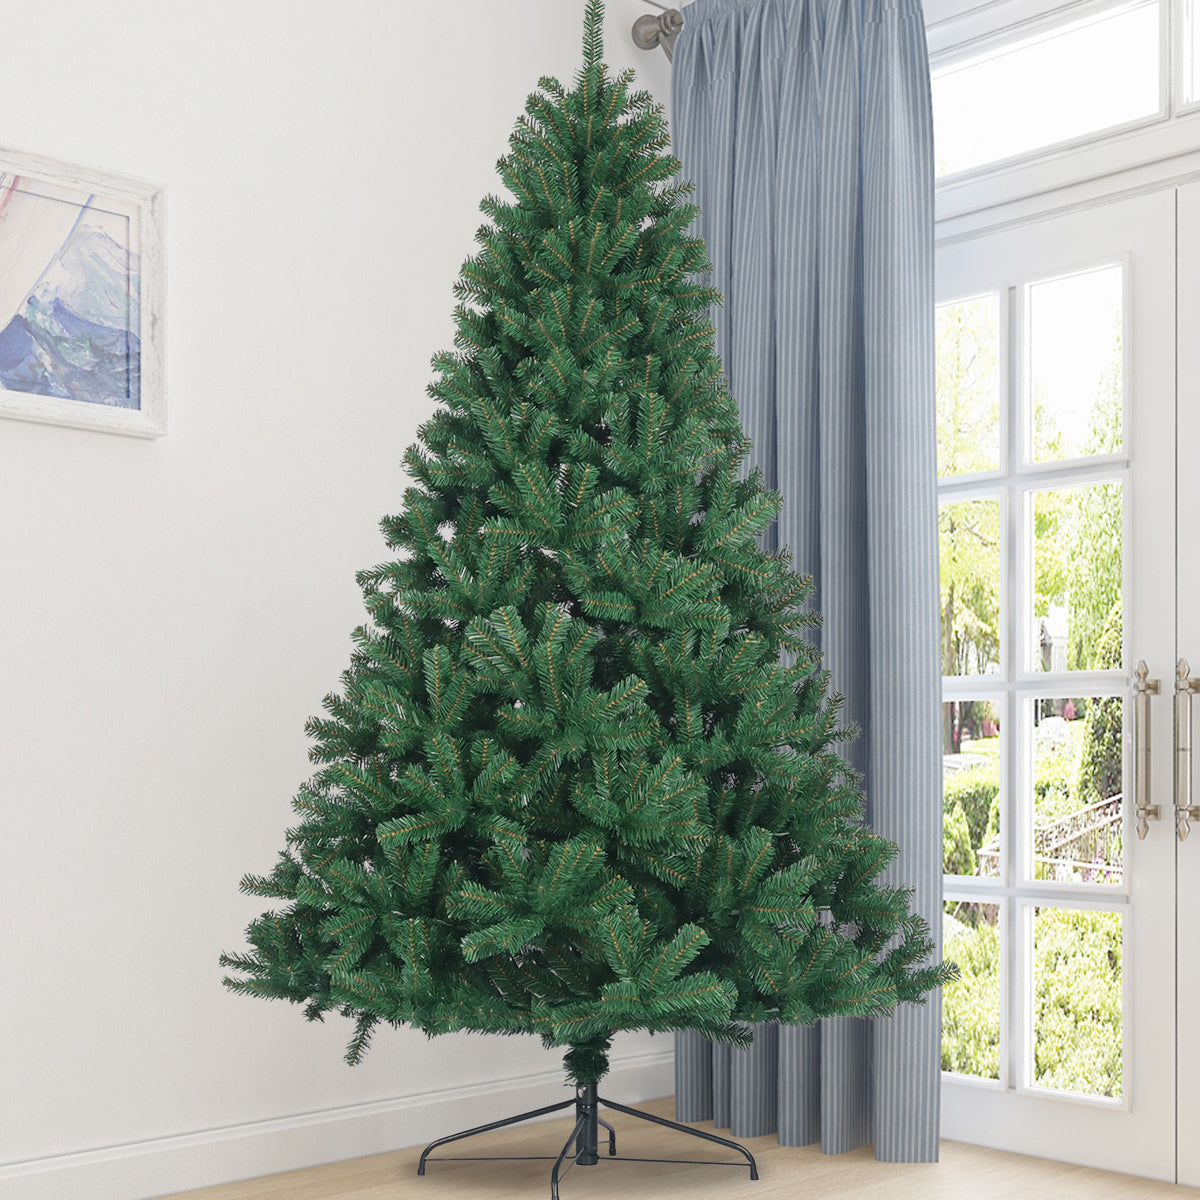 SYNGAR Christmas Decorations, 7.5ft Artificial Christmas Tree Spruce with Foldable Metal Stand for Festivals, Green, LJ204